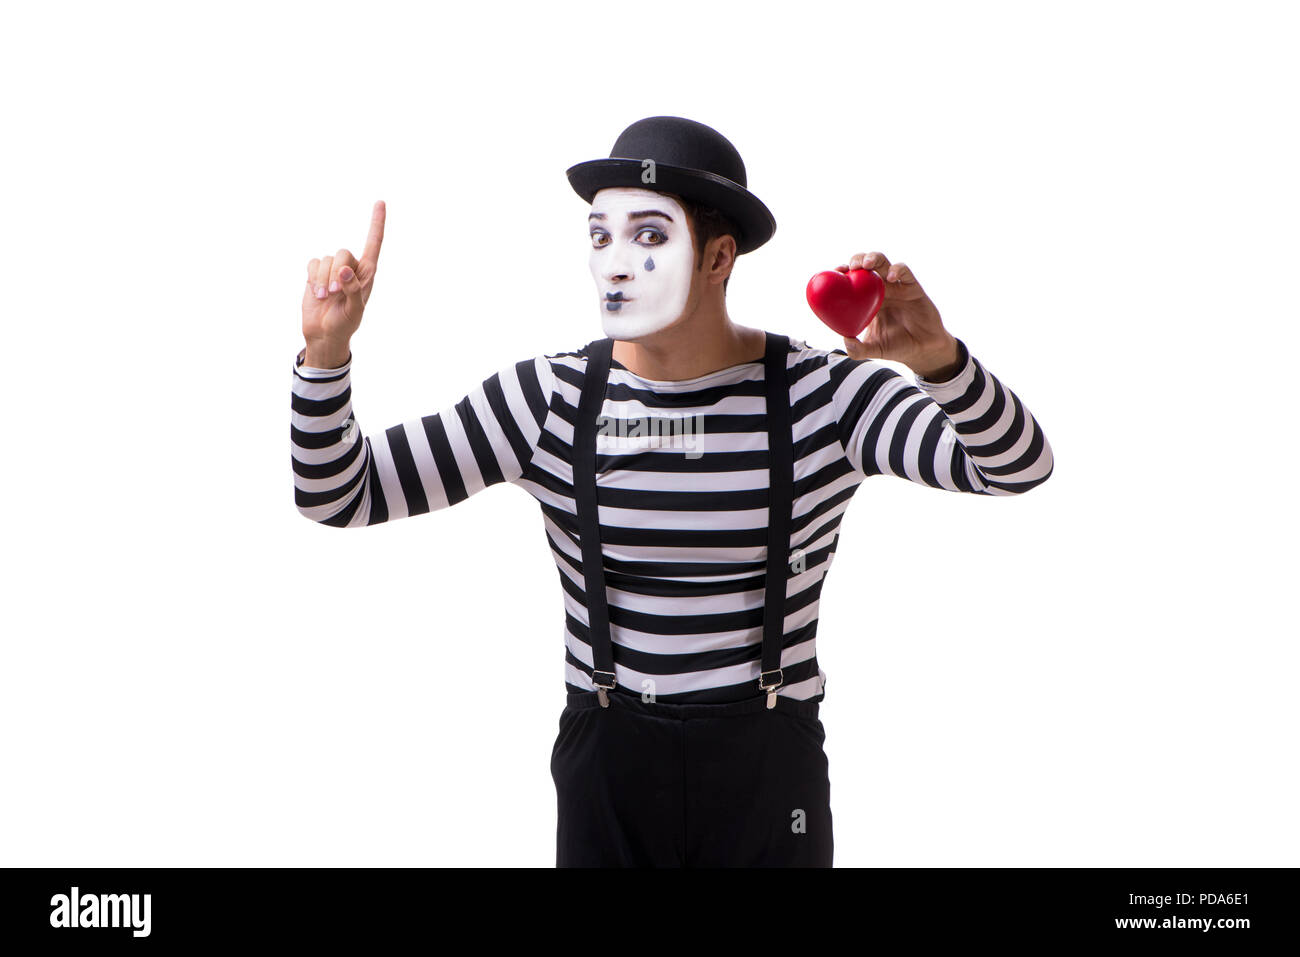 Mime holding red heart isolated on white background Stock Photo